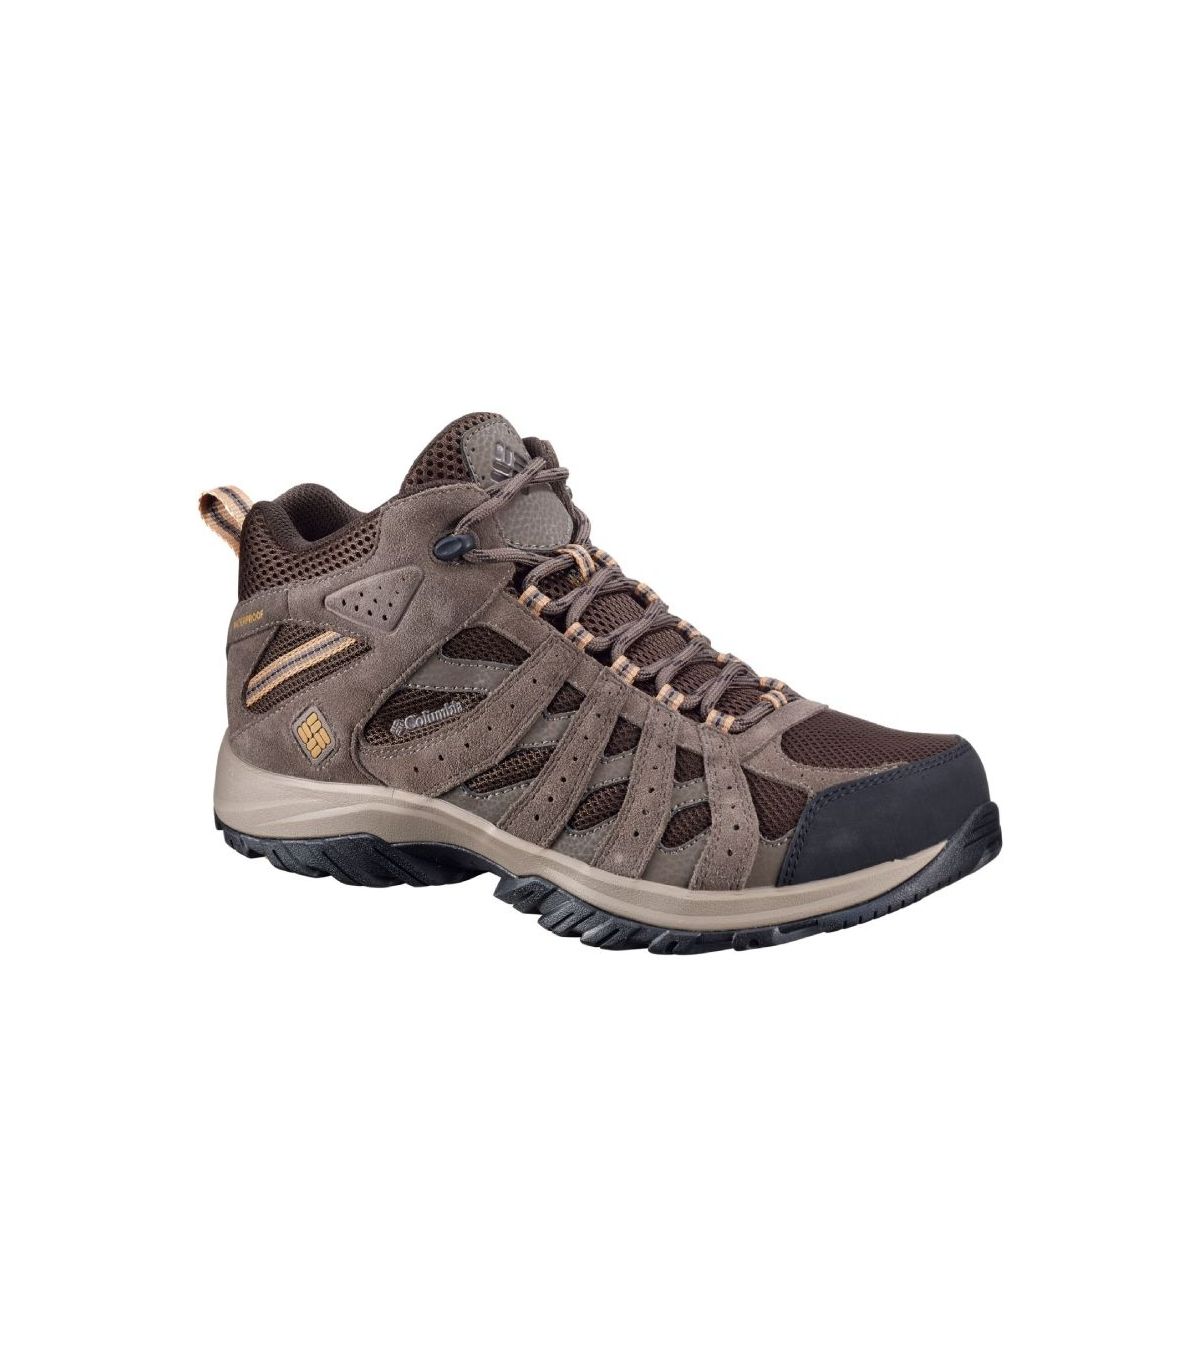 Columbia Canyon Point Mid Zapatos impermeables de senderismo para mujer